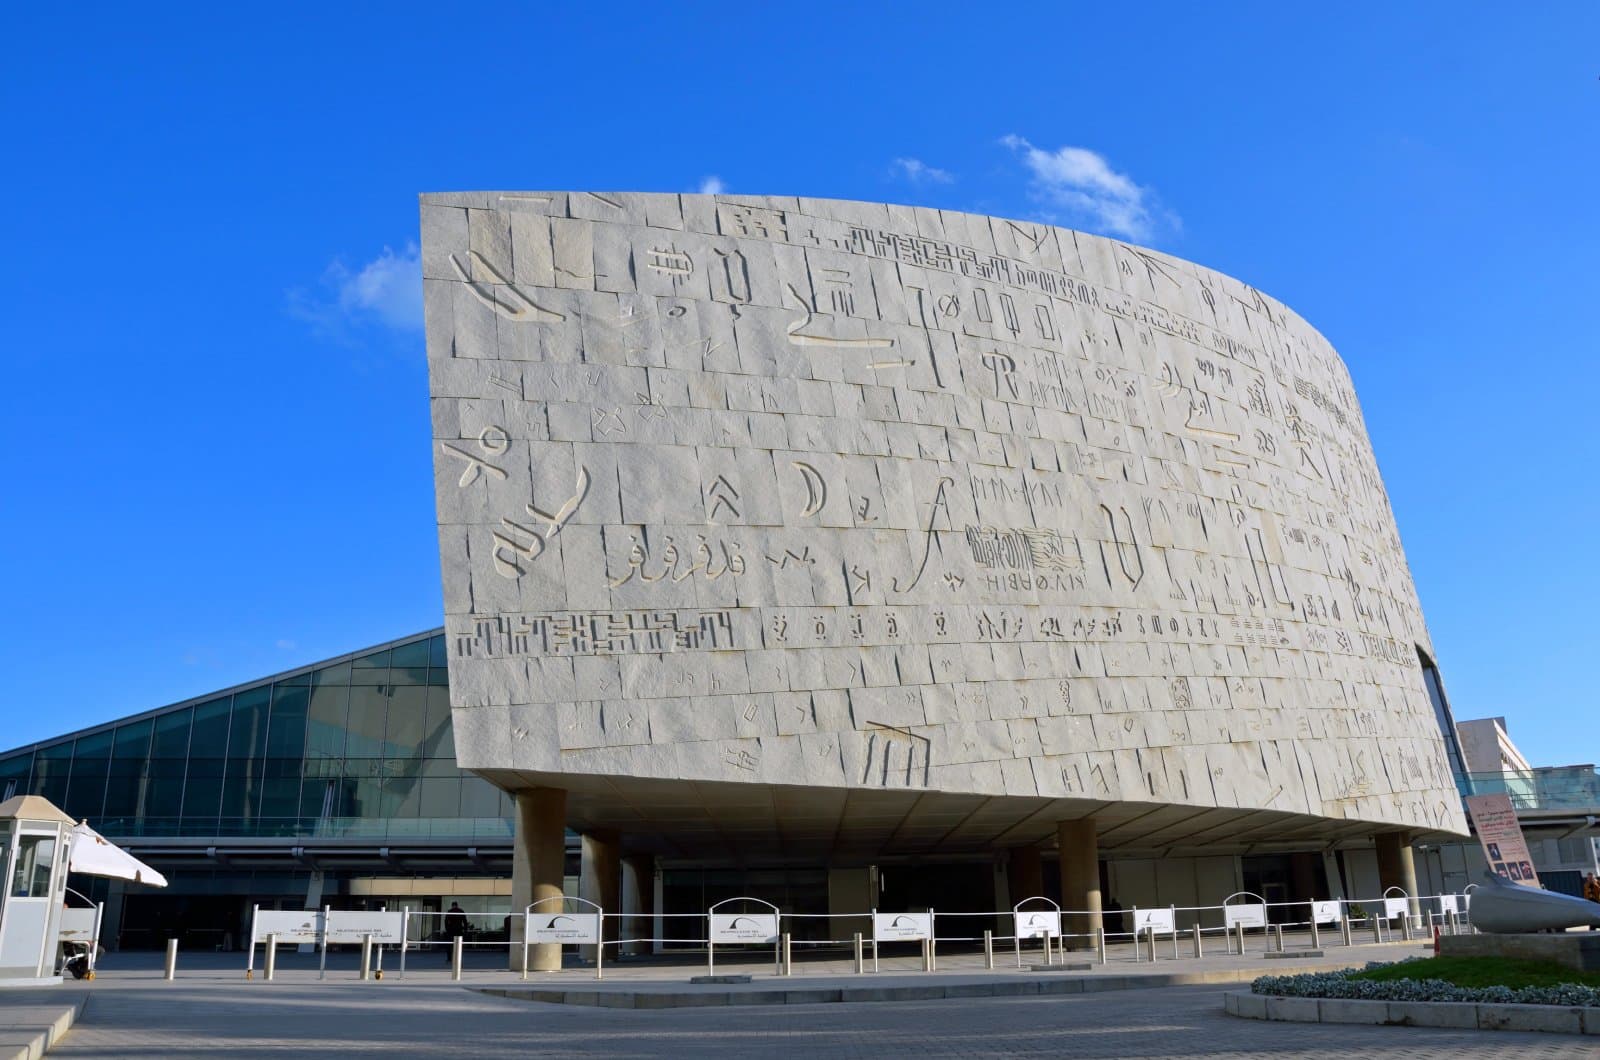 <p class="wp-caption-text">Image Credit: Shutterstock / suronin</p>  <p><span>The Bibliotheca Alexandrina, a striking piece of contemporary architecture and intellectual beacon, is a tribute to the ancient Library of Alexandria, one of the ancient world’s largest and most significant libraries. This modern library is not only a center for learning and culture, with millions of books, manuscripts, and a host of museums and art galleries, but also a symbol of Egypt’s dedication to cultural exchange and preservation. Its design, featuring a vast sun disk, mirrors the city’s connection to the Mediterranean and its historical significance as a center of knowledge and scholarship.</span></p>